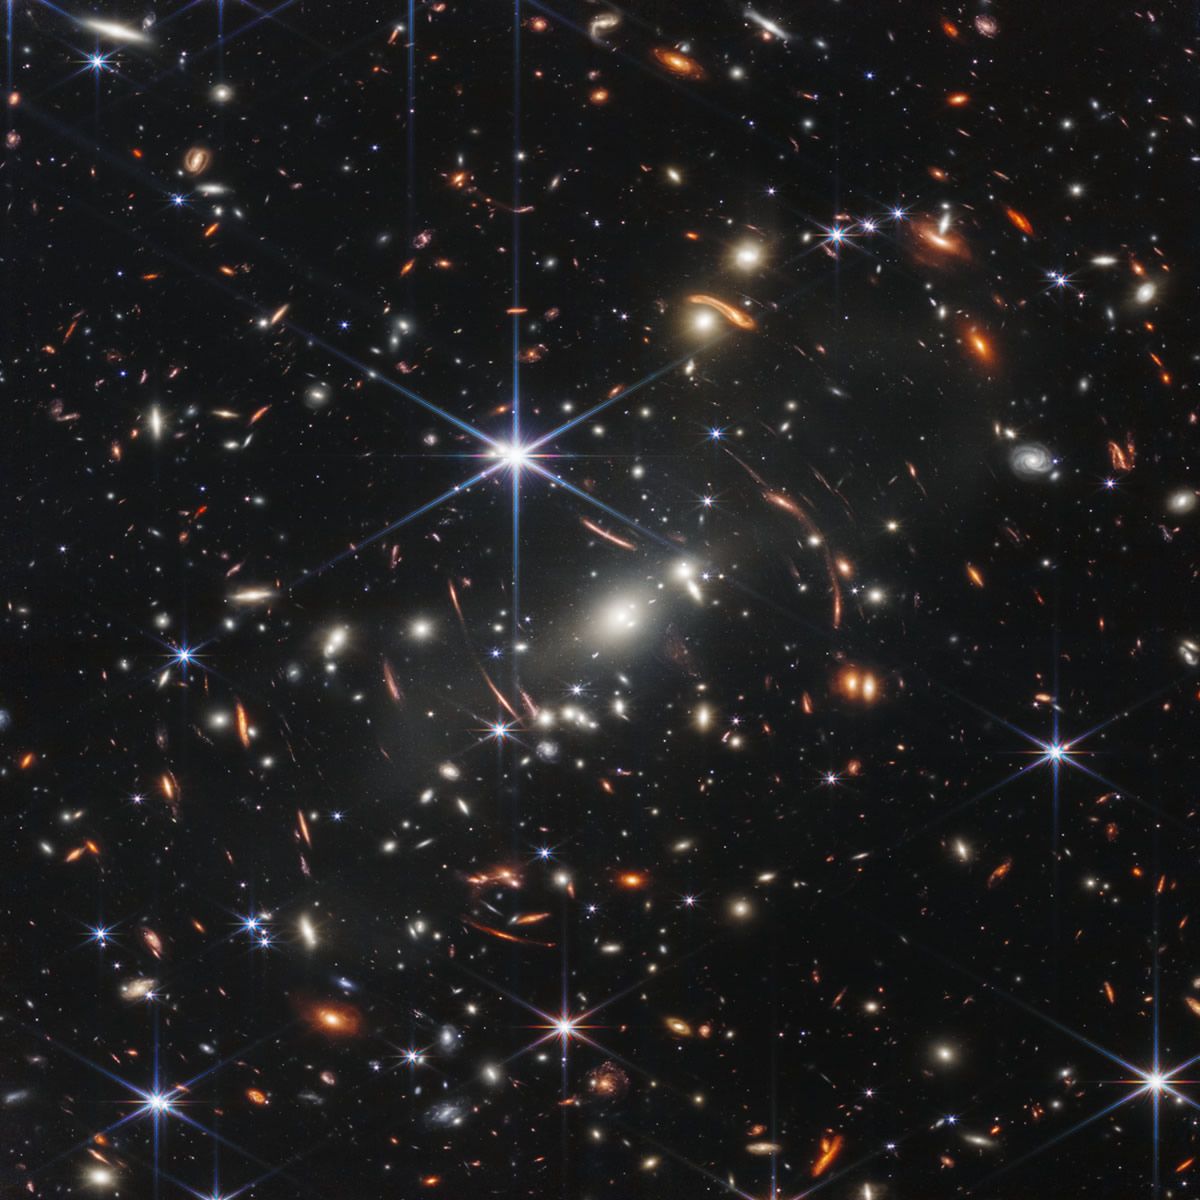 image of galaxy cluster SMACS 0723